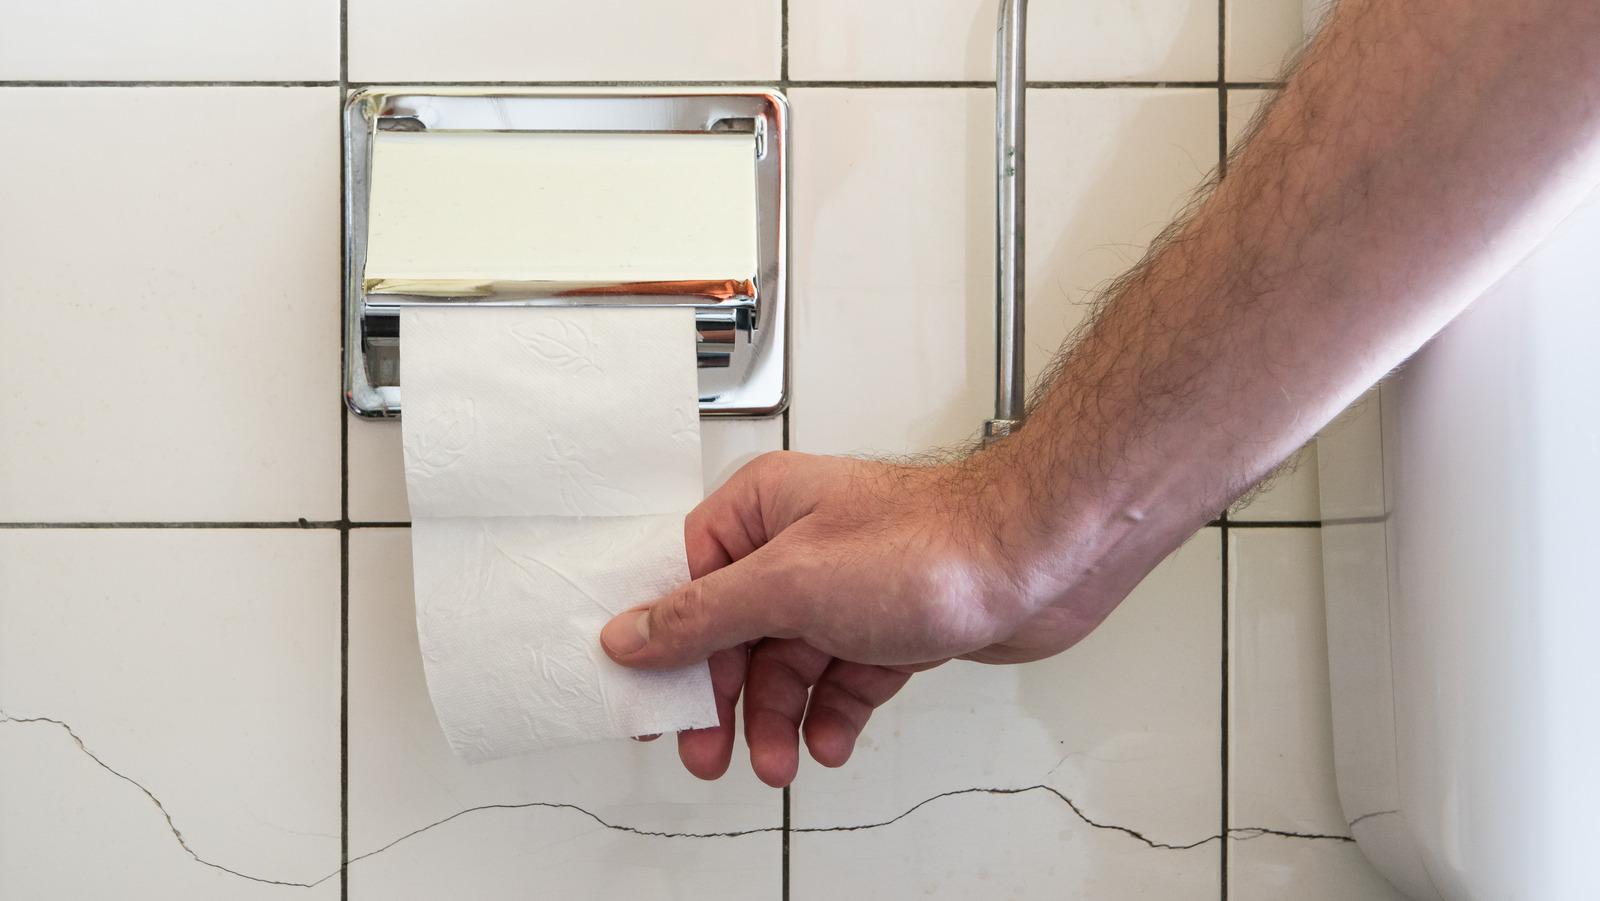 Medical Diagnoses That Require Swabbing Your Own Poop - Health Digest